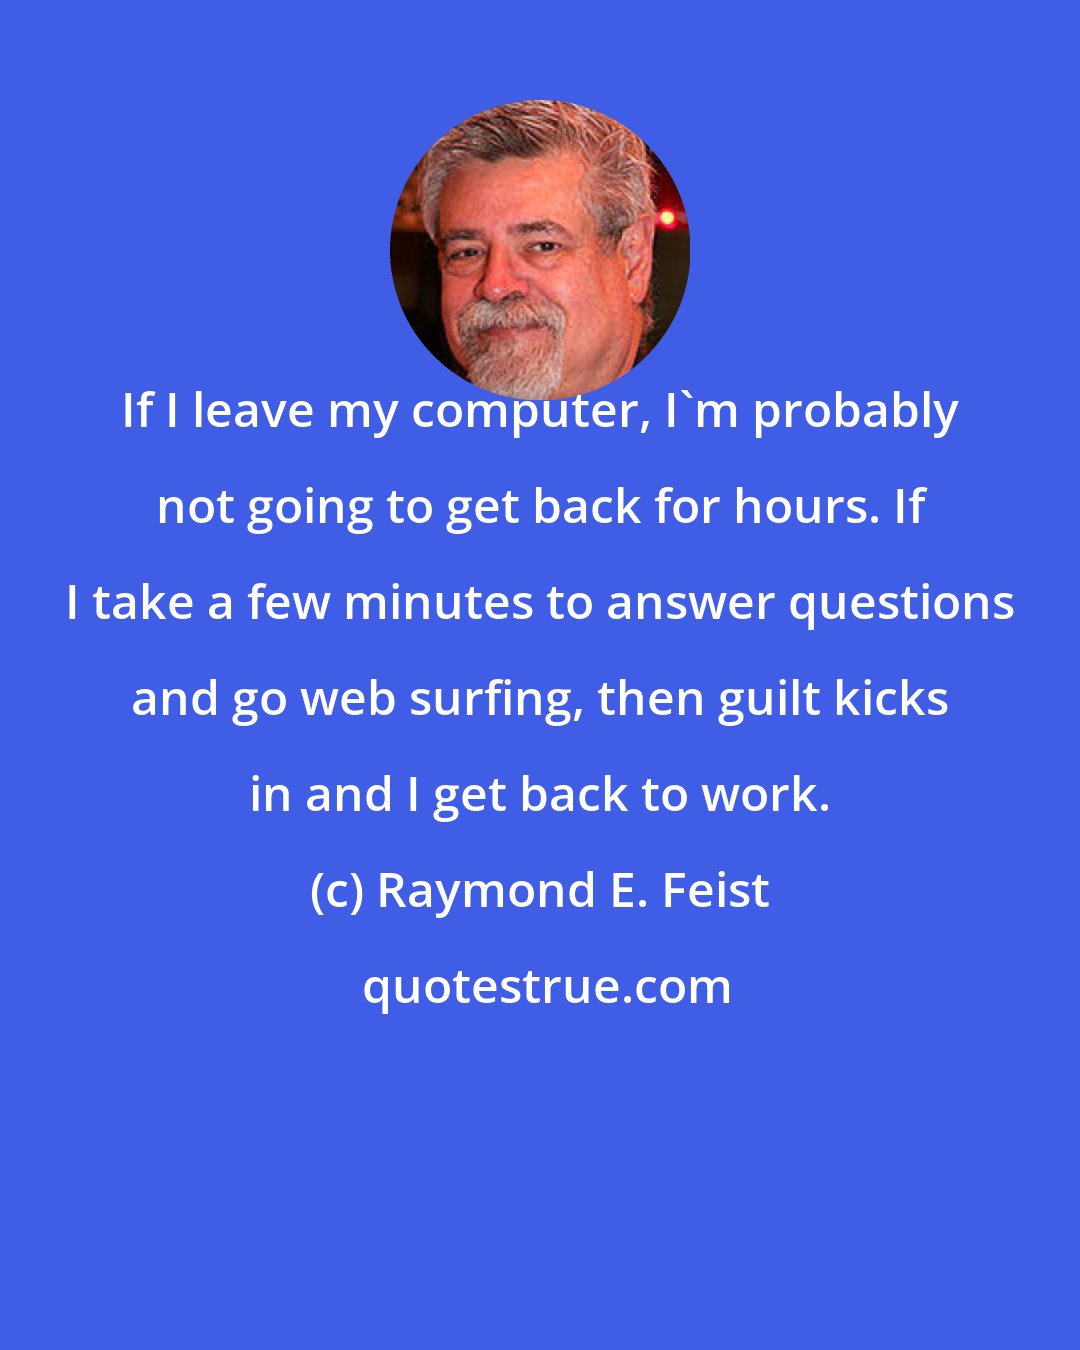 Raymond E. Feist: If I leave my computer, I'm probably not going to get back for hours. If I take a few minutes to answer questions and go web surfing, then guilt kicks in and I get back to work.